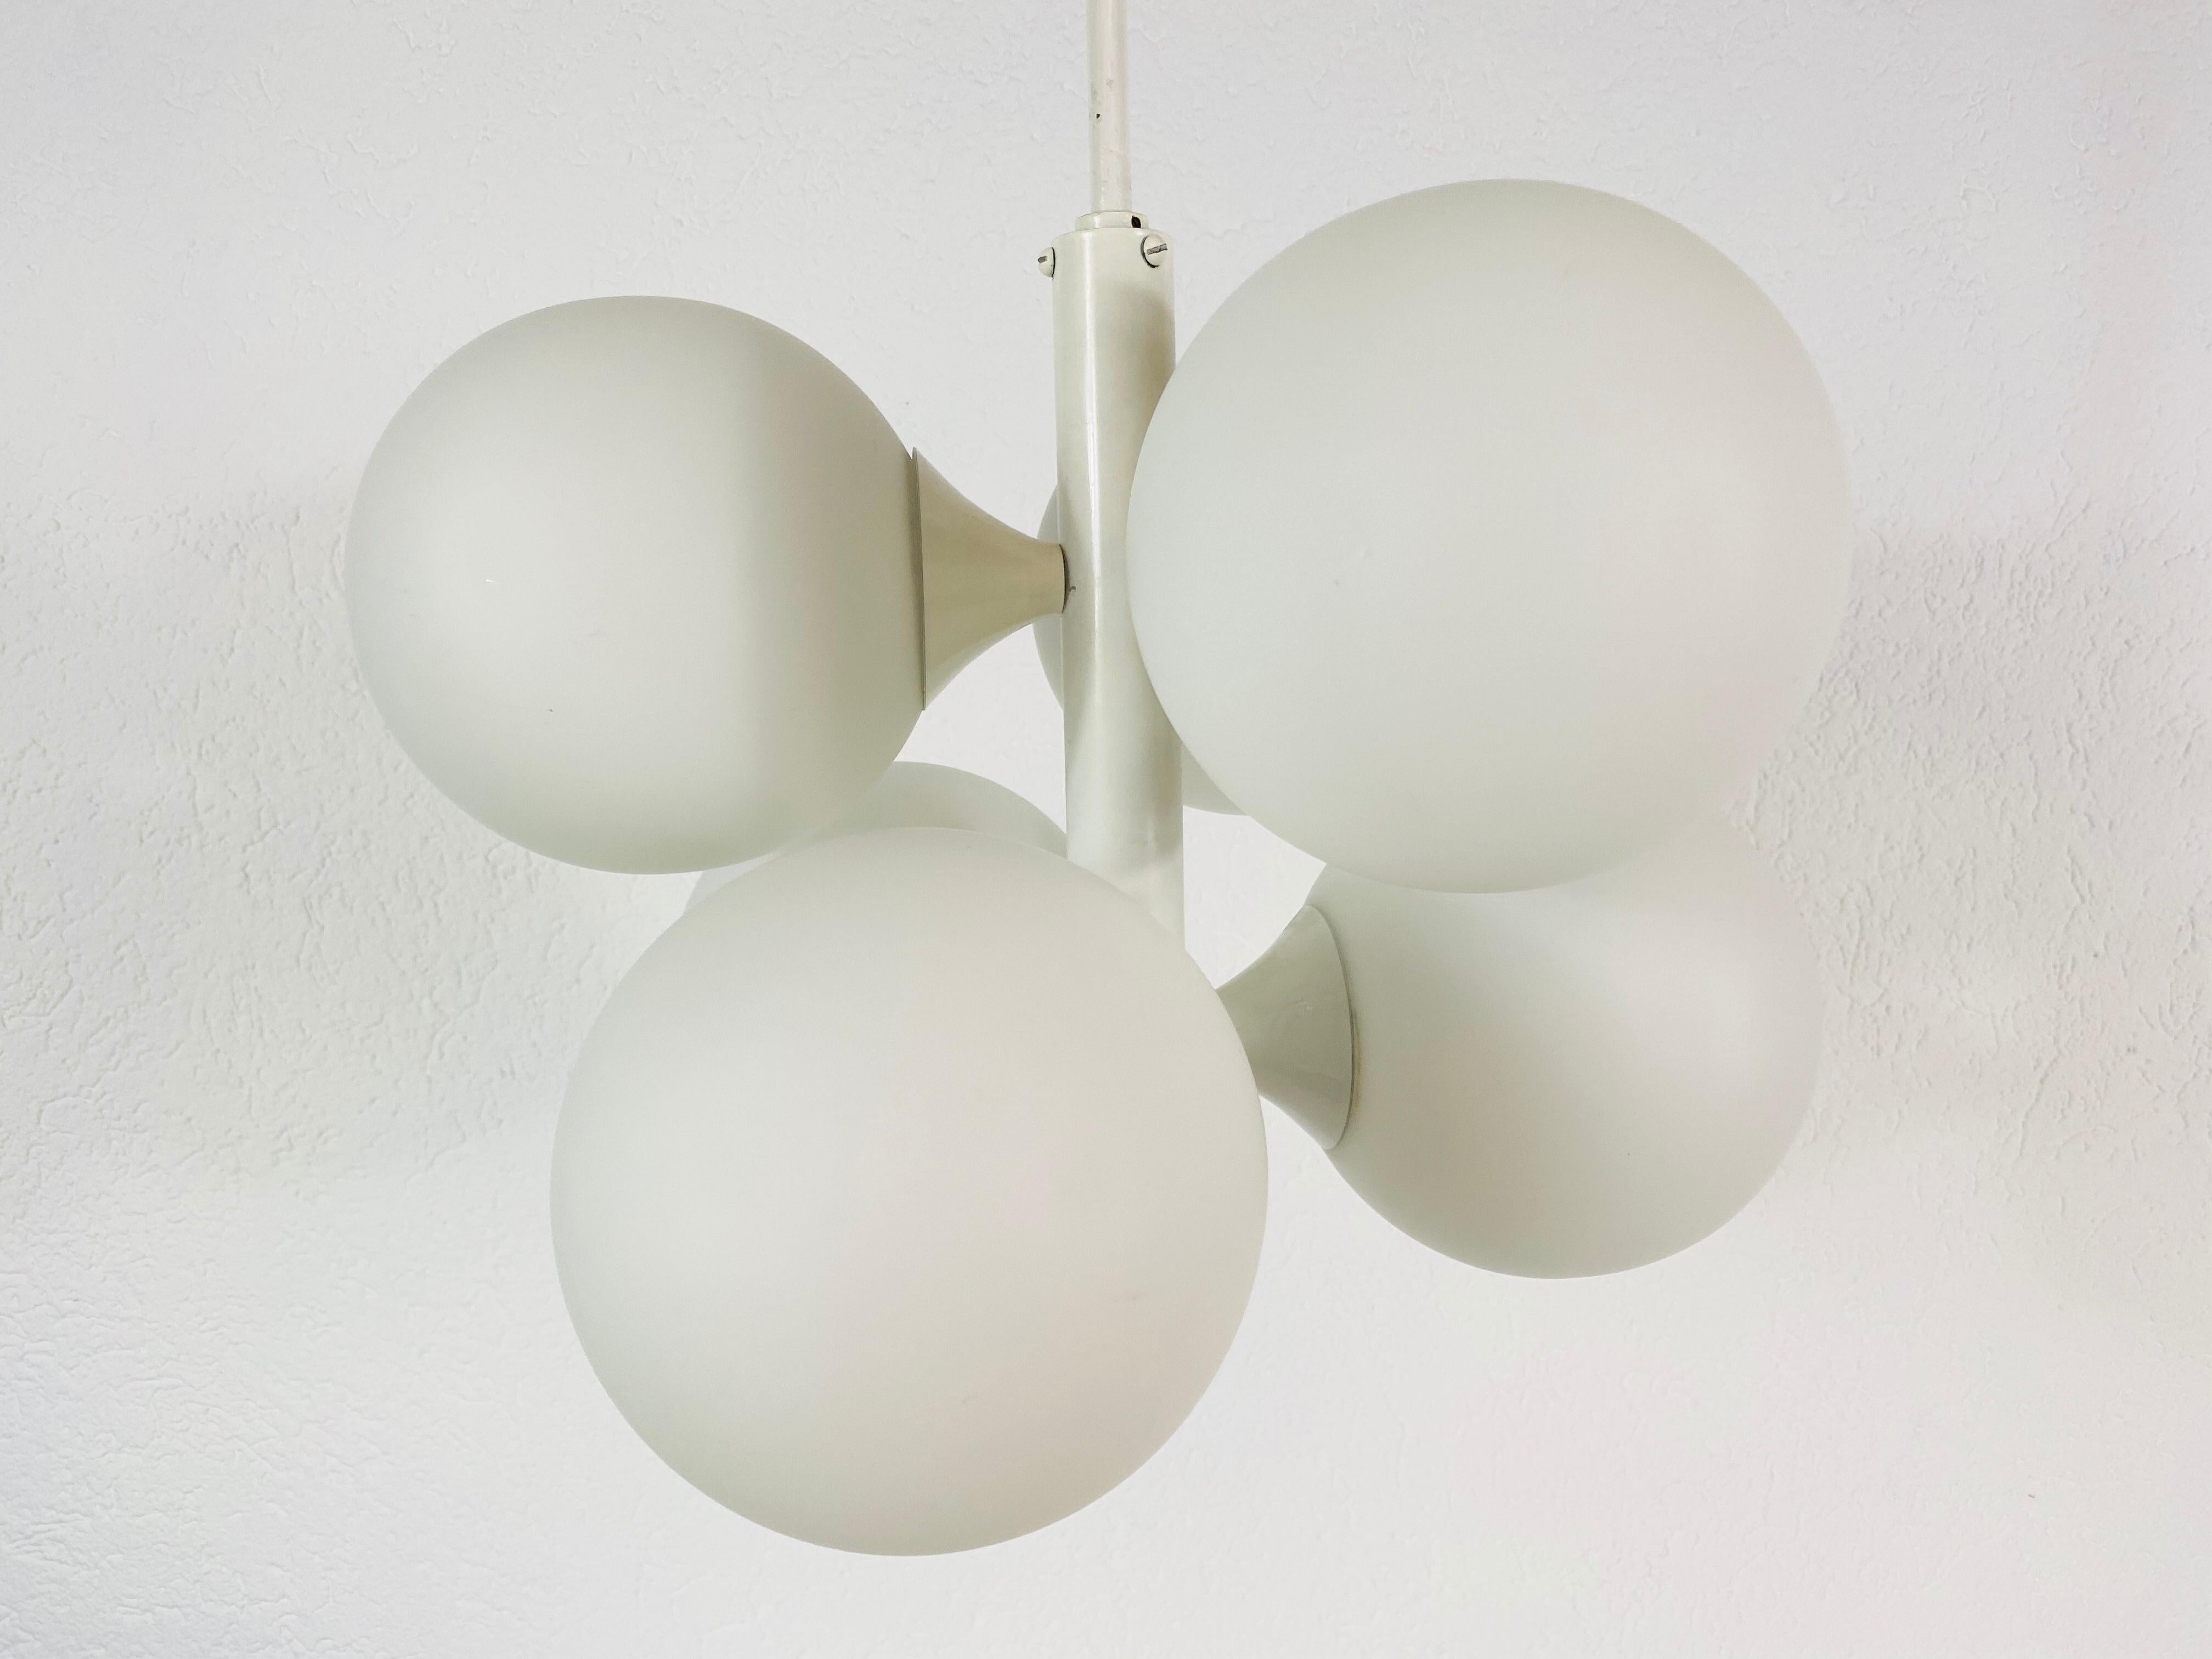 Rare Kaiser Midcentury White 4-Arm Space Age Chandelier, 1960s, Germany For Sale 1